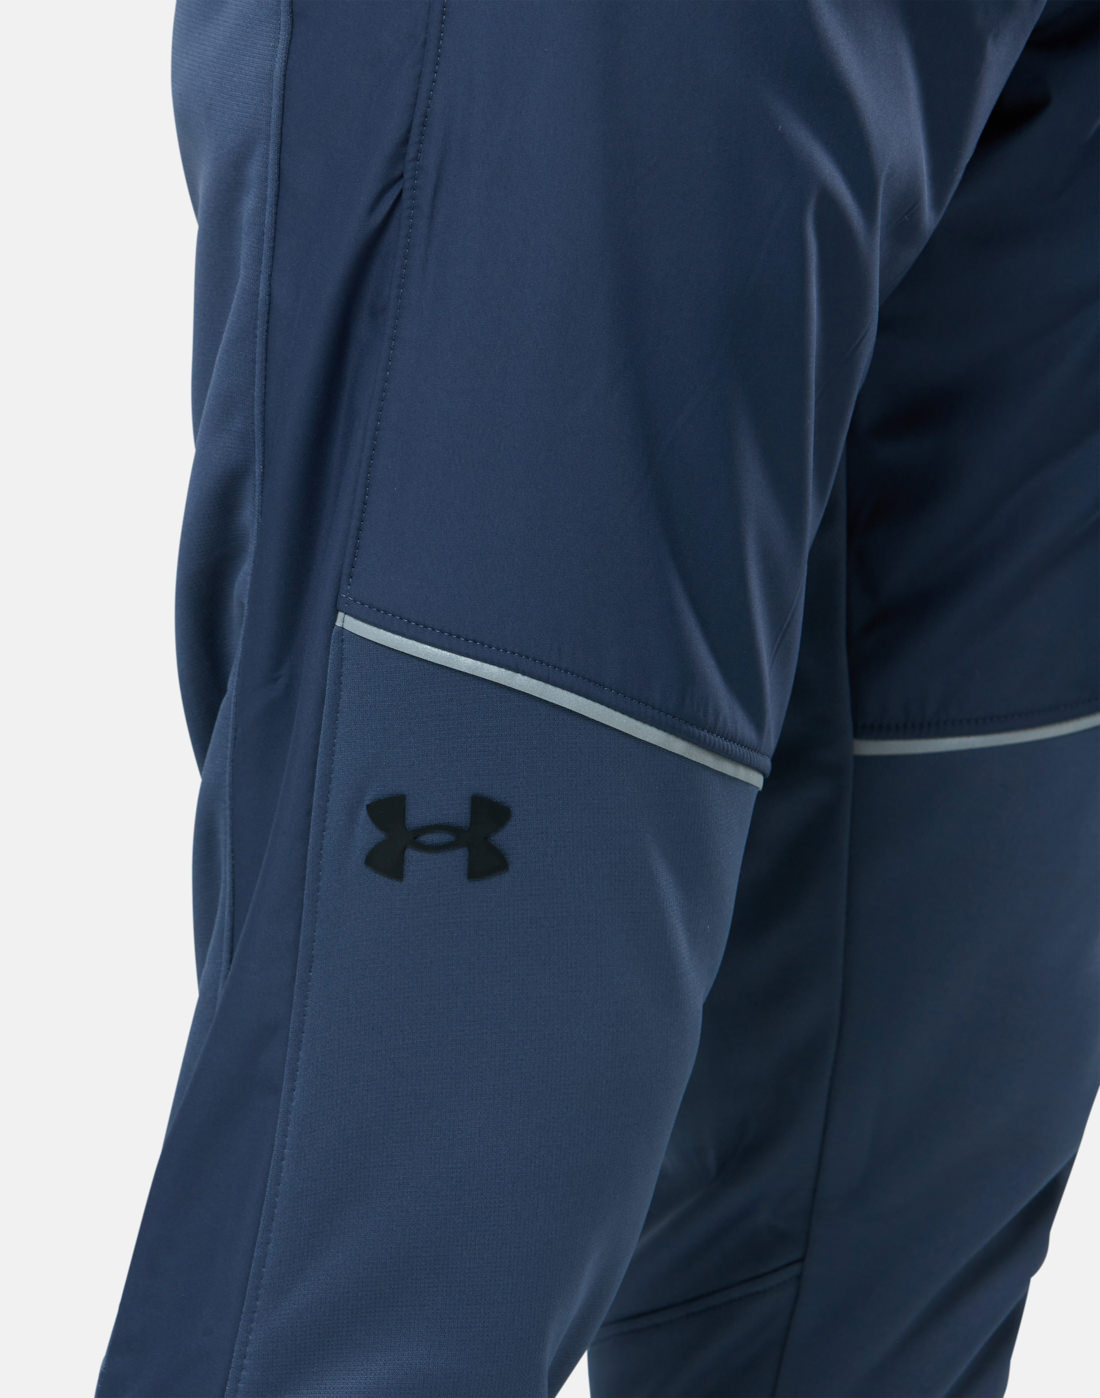 Under Armour Mens Armour Fleece Storm Joggers - Grey | Life Style Sports IE